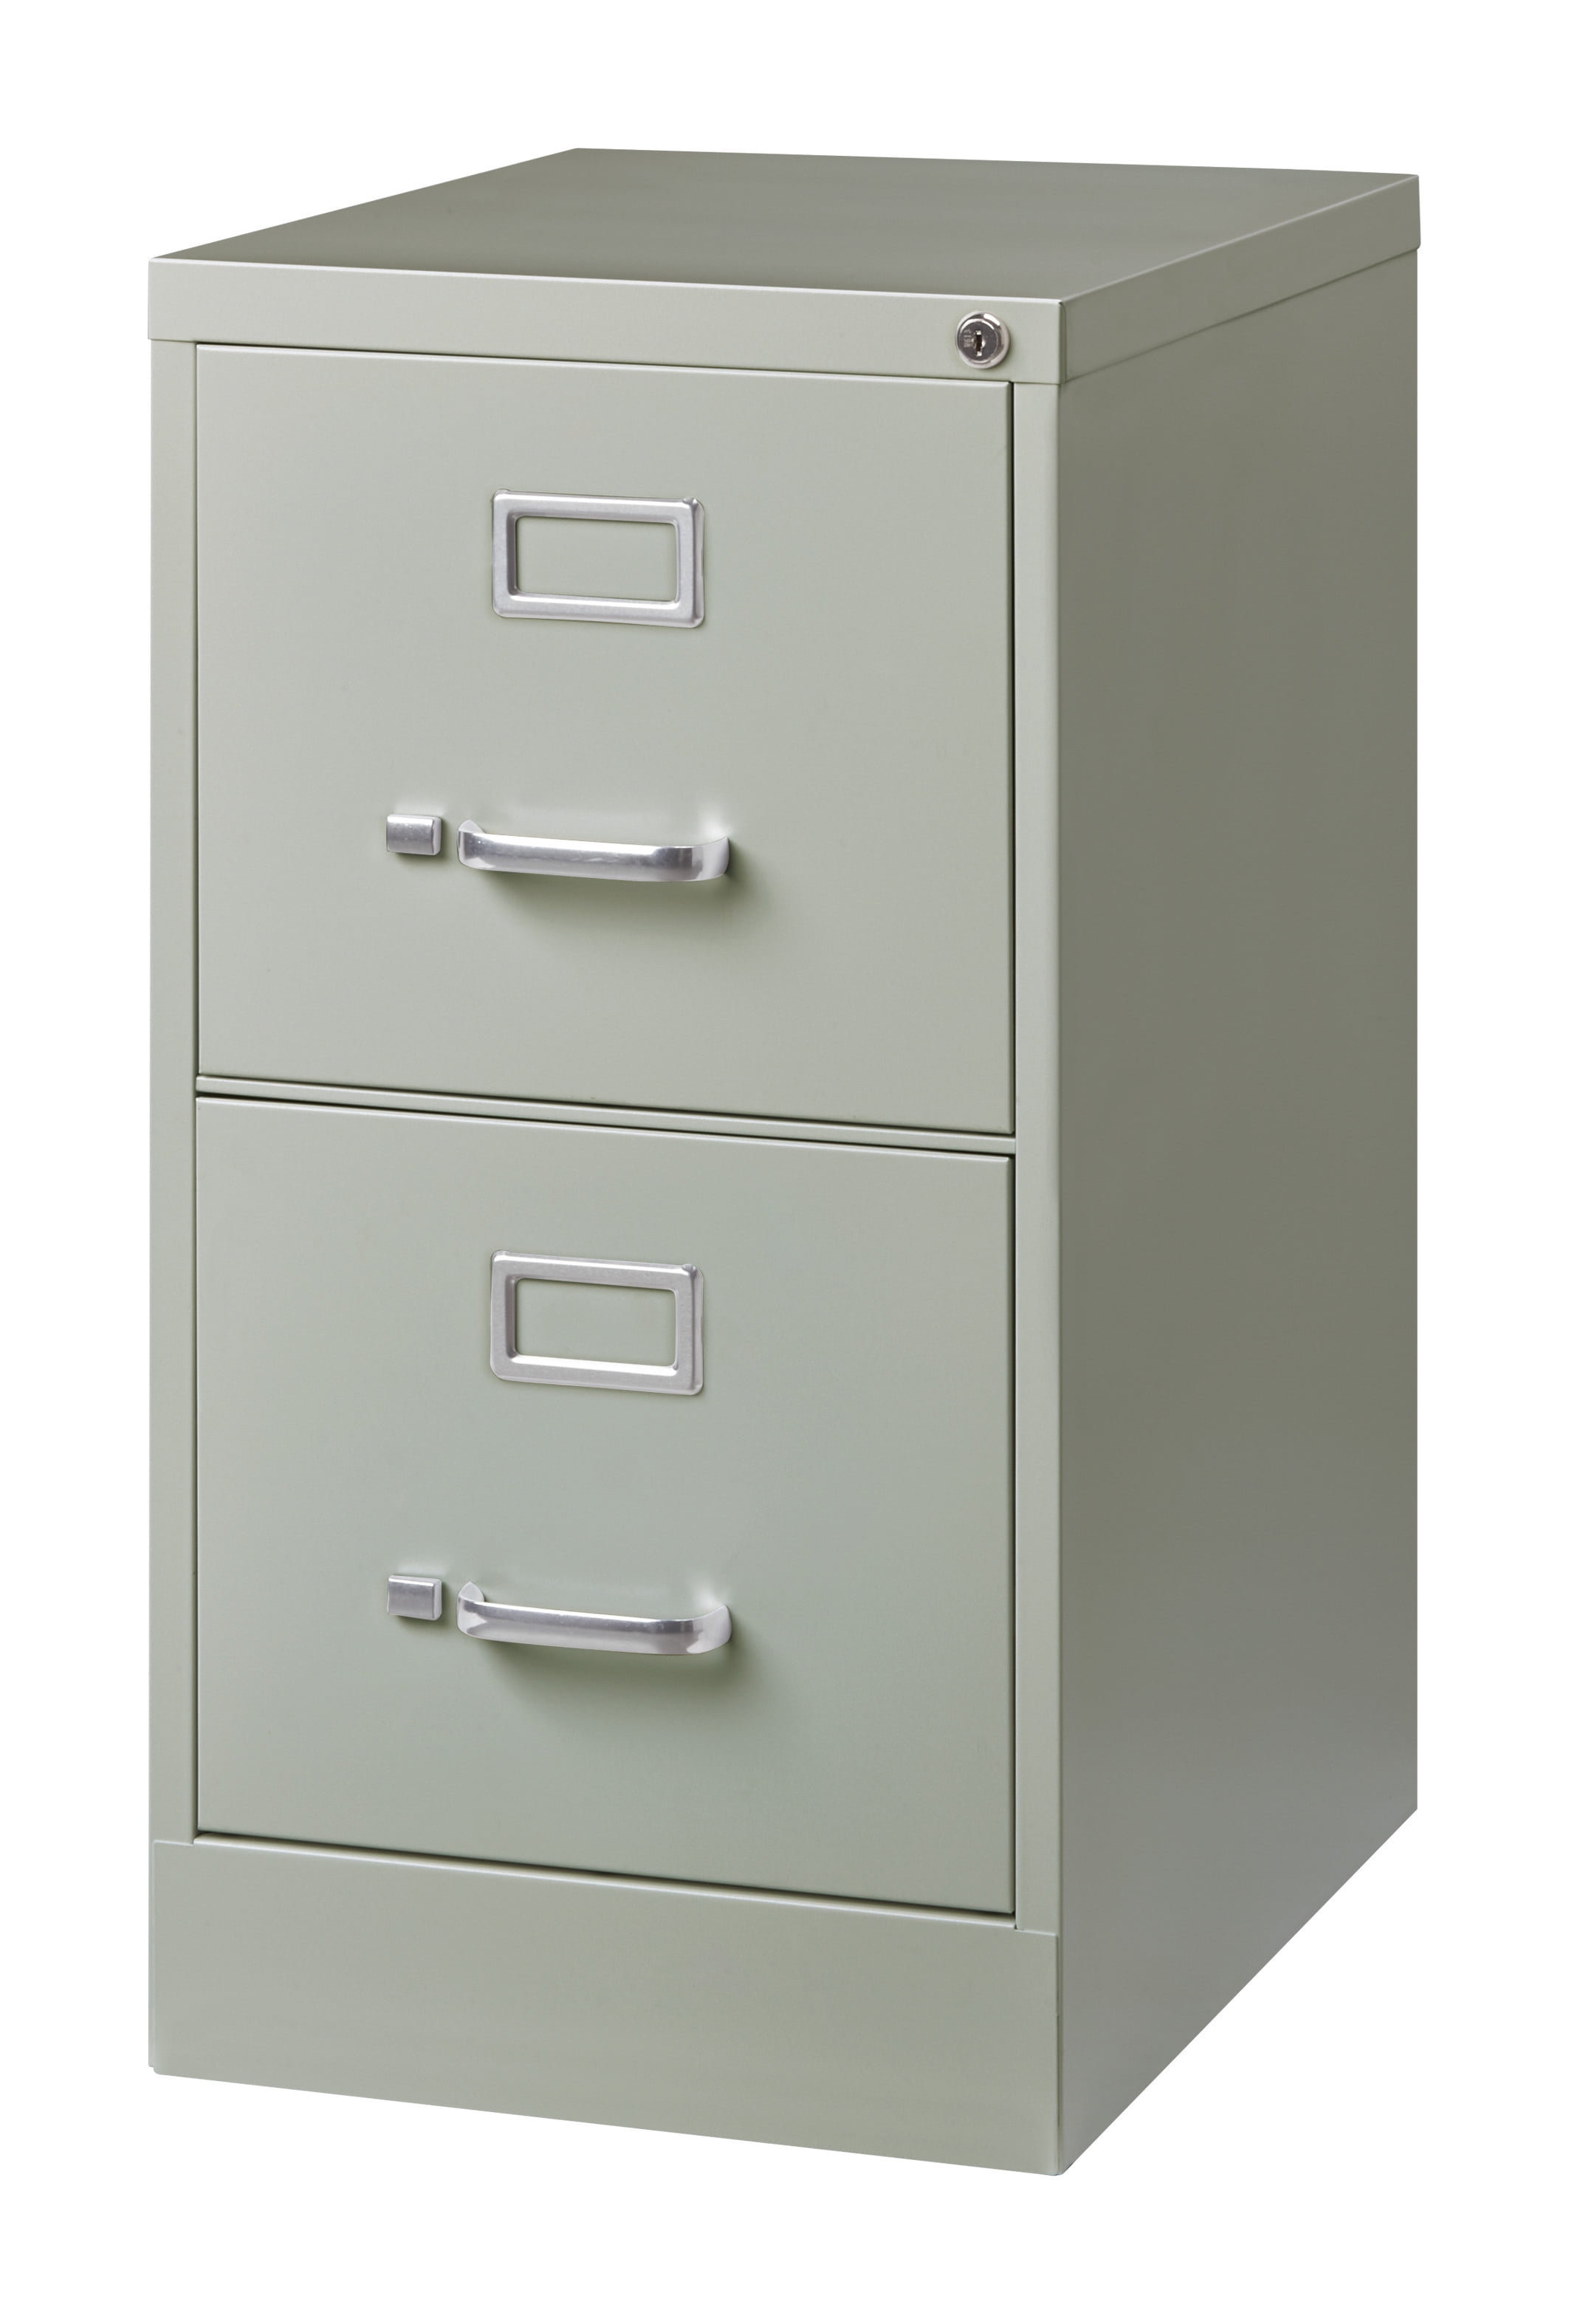 Metallic Charcoal Office Dimensions 22 Deep 2 Drawer Letter-Sized Metal File Cabinet 16871 